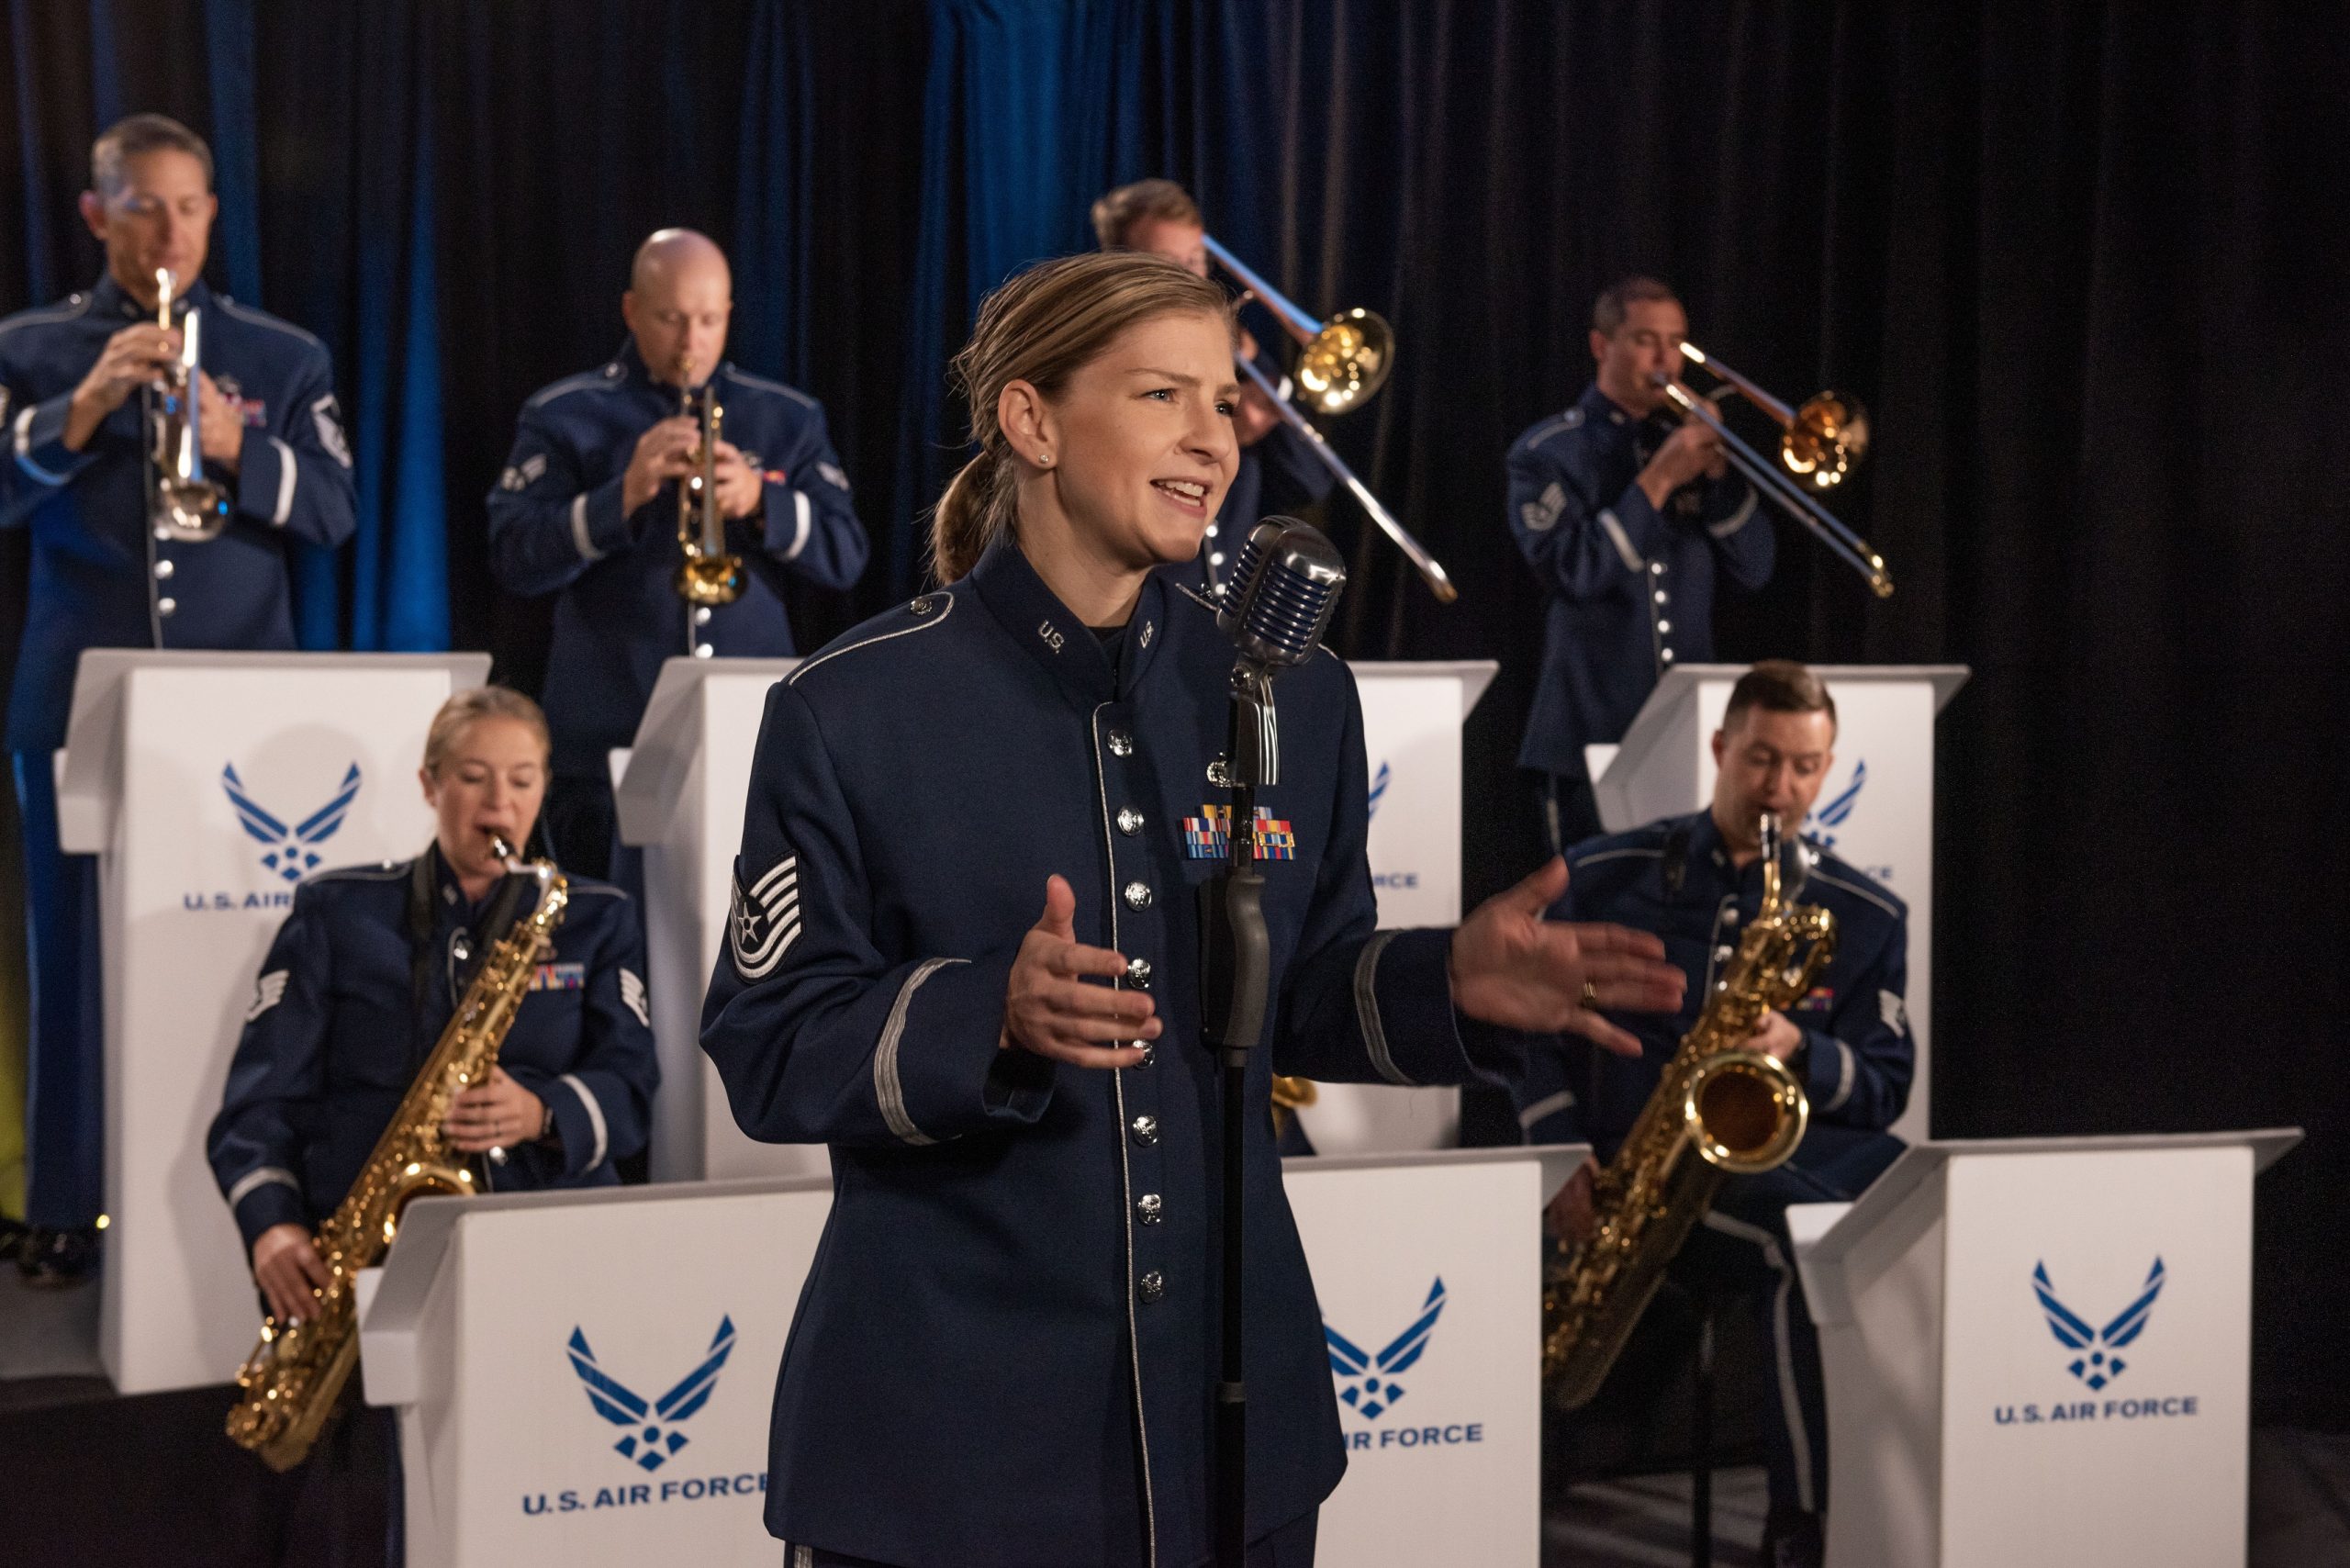 U.S. Air Force Band Europe mit Fox, Wiggle and Sass am 07. Juni in Faßberg